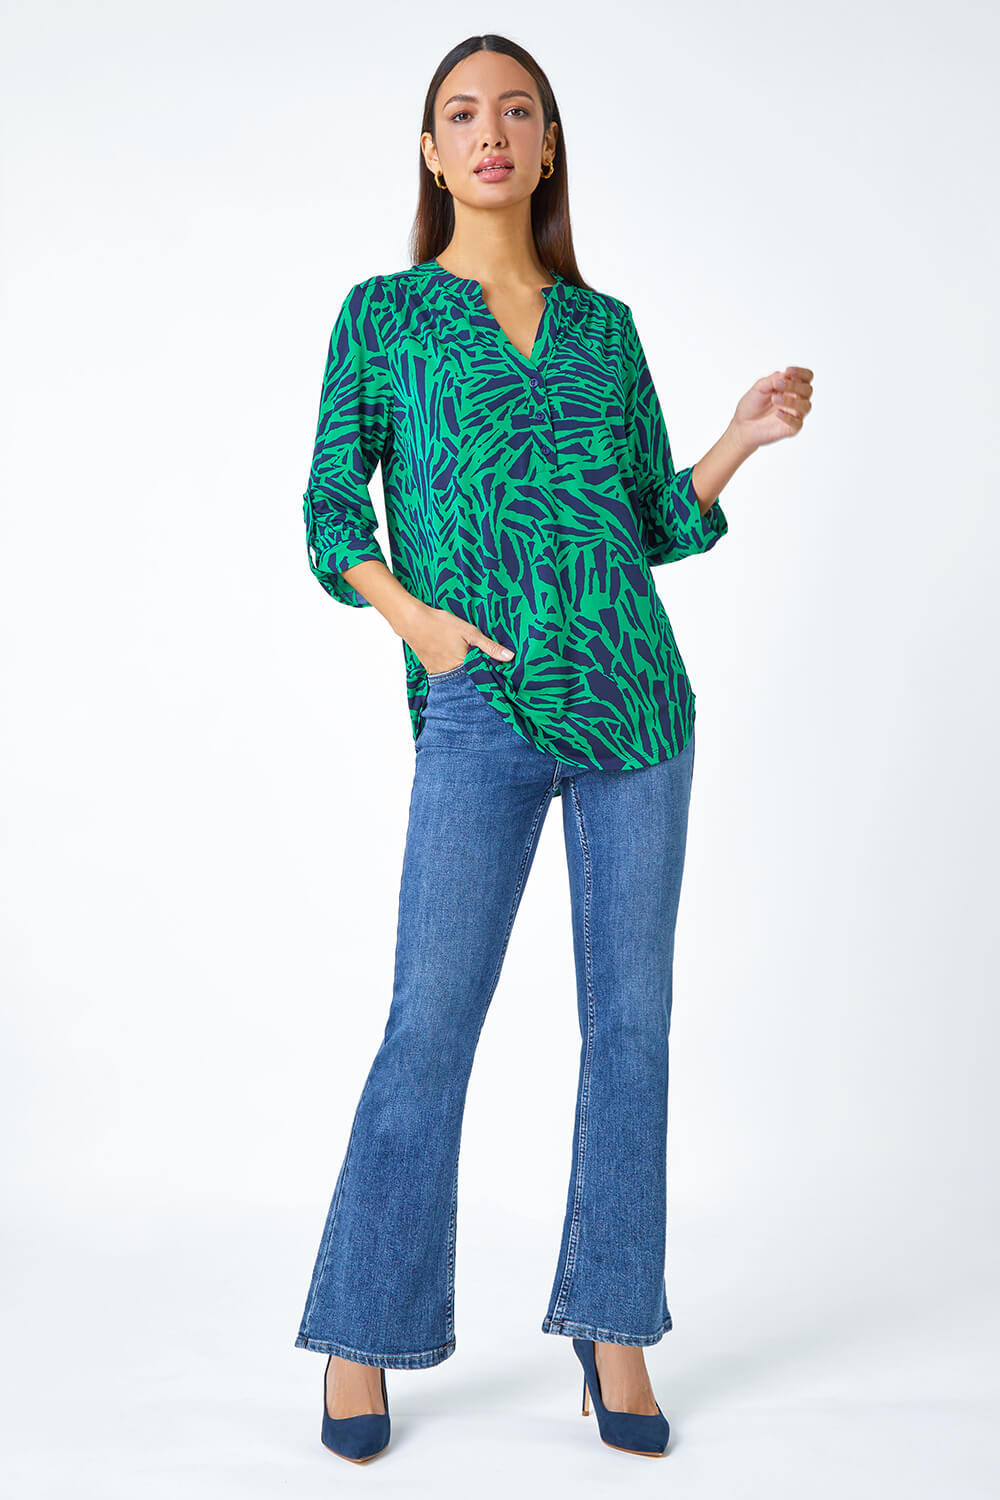 Green Abstract Animal Stretch Jersey Top, Image 2 of 5